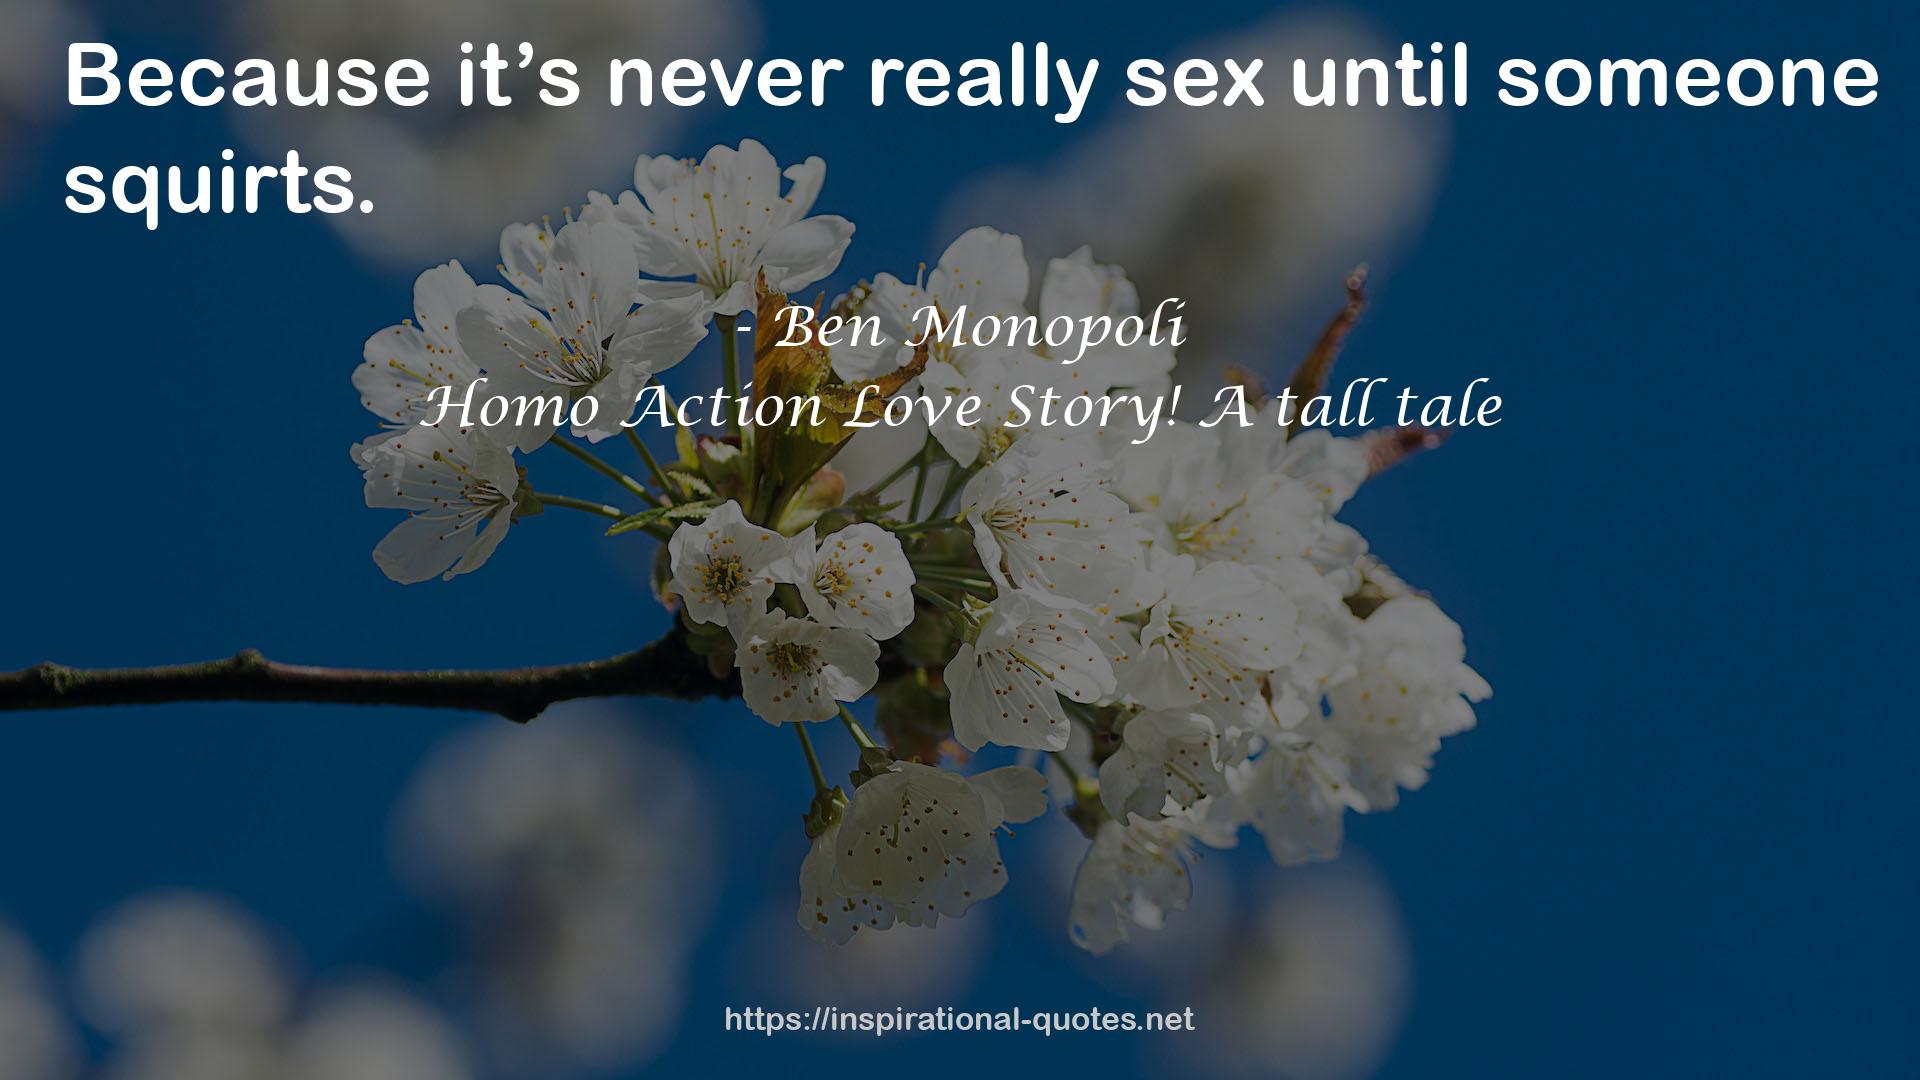 Homo Action Love Story! A tall tale QUOTES